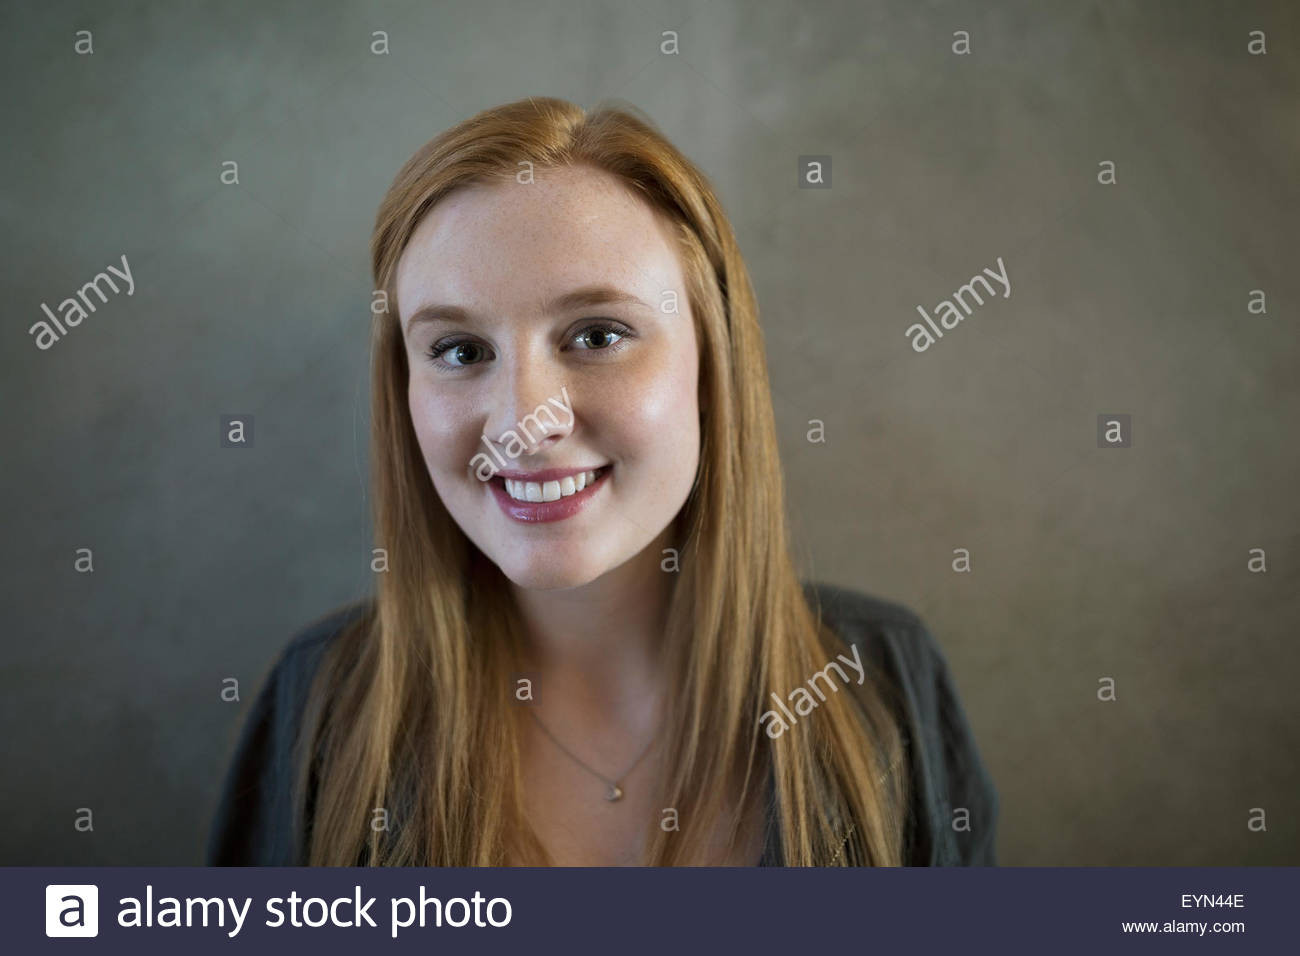 Portrait smiling young woman with red hair Stock Photo